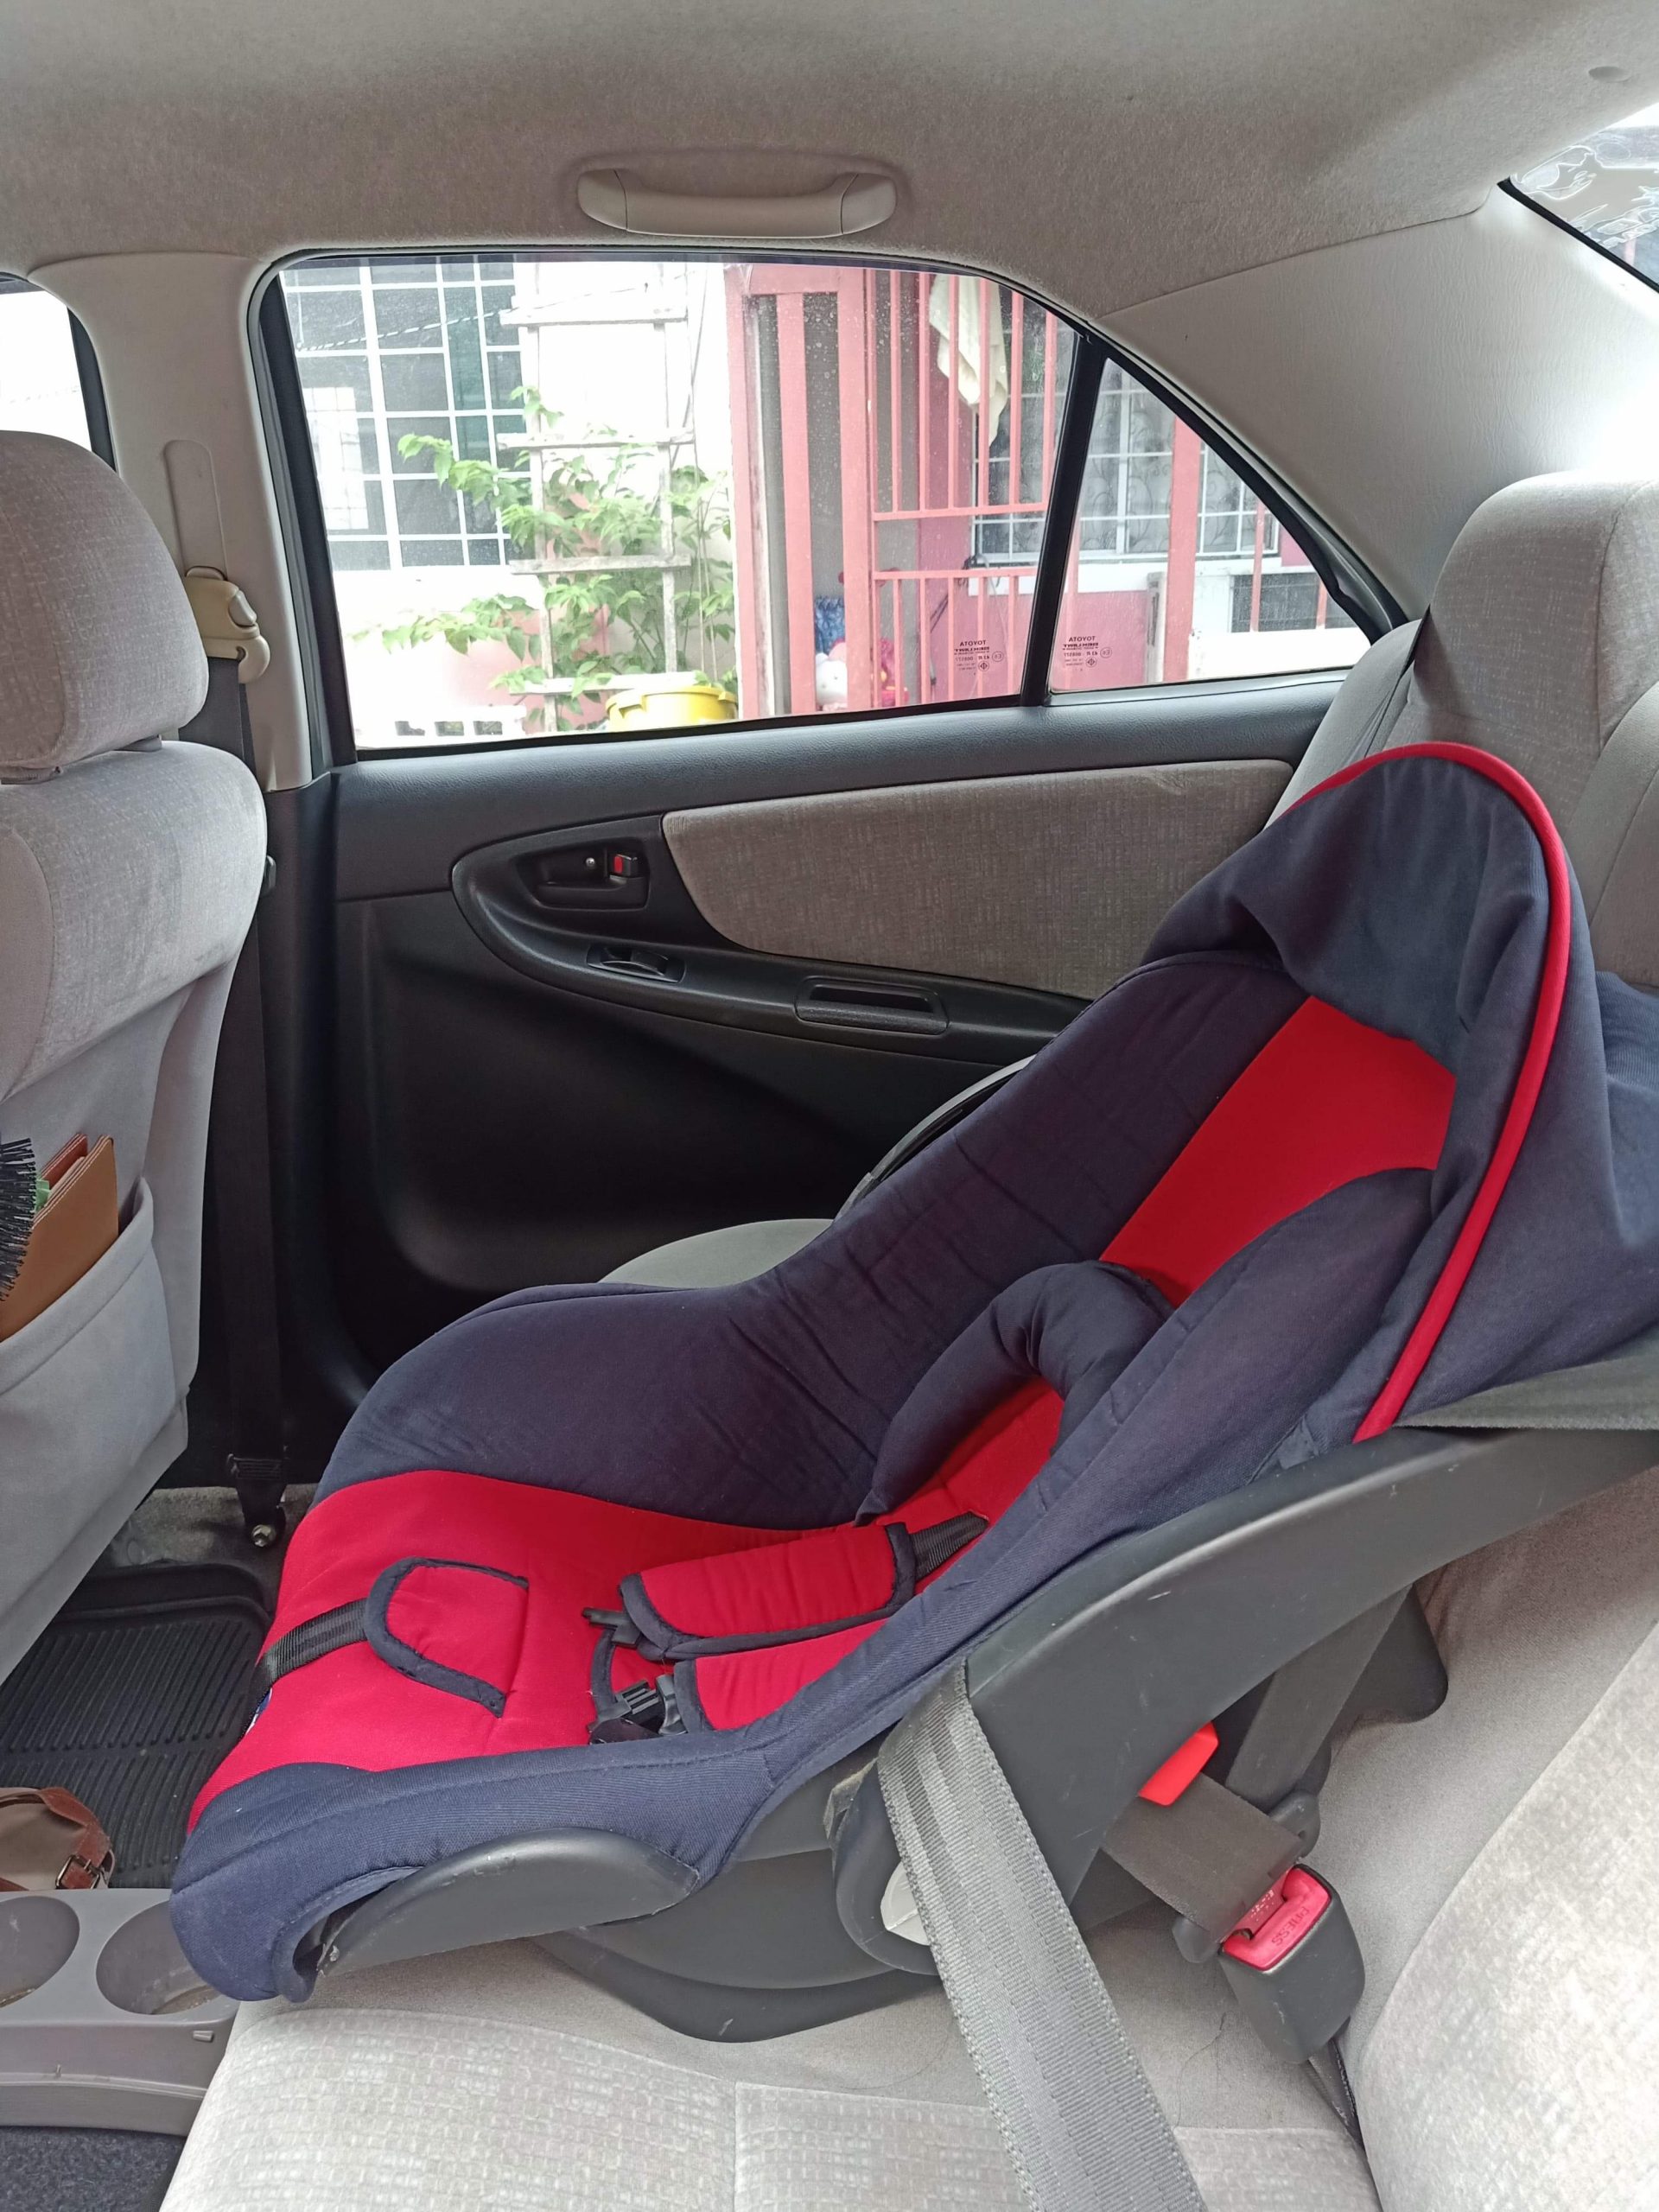 Denessa Aguilar's child car seat for her nine-month-old son.jpeg